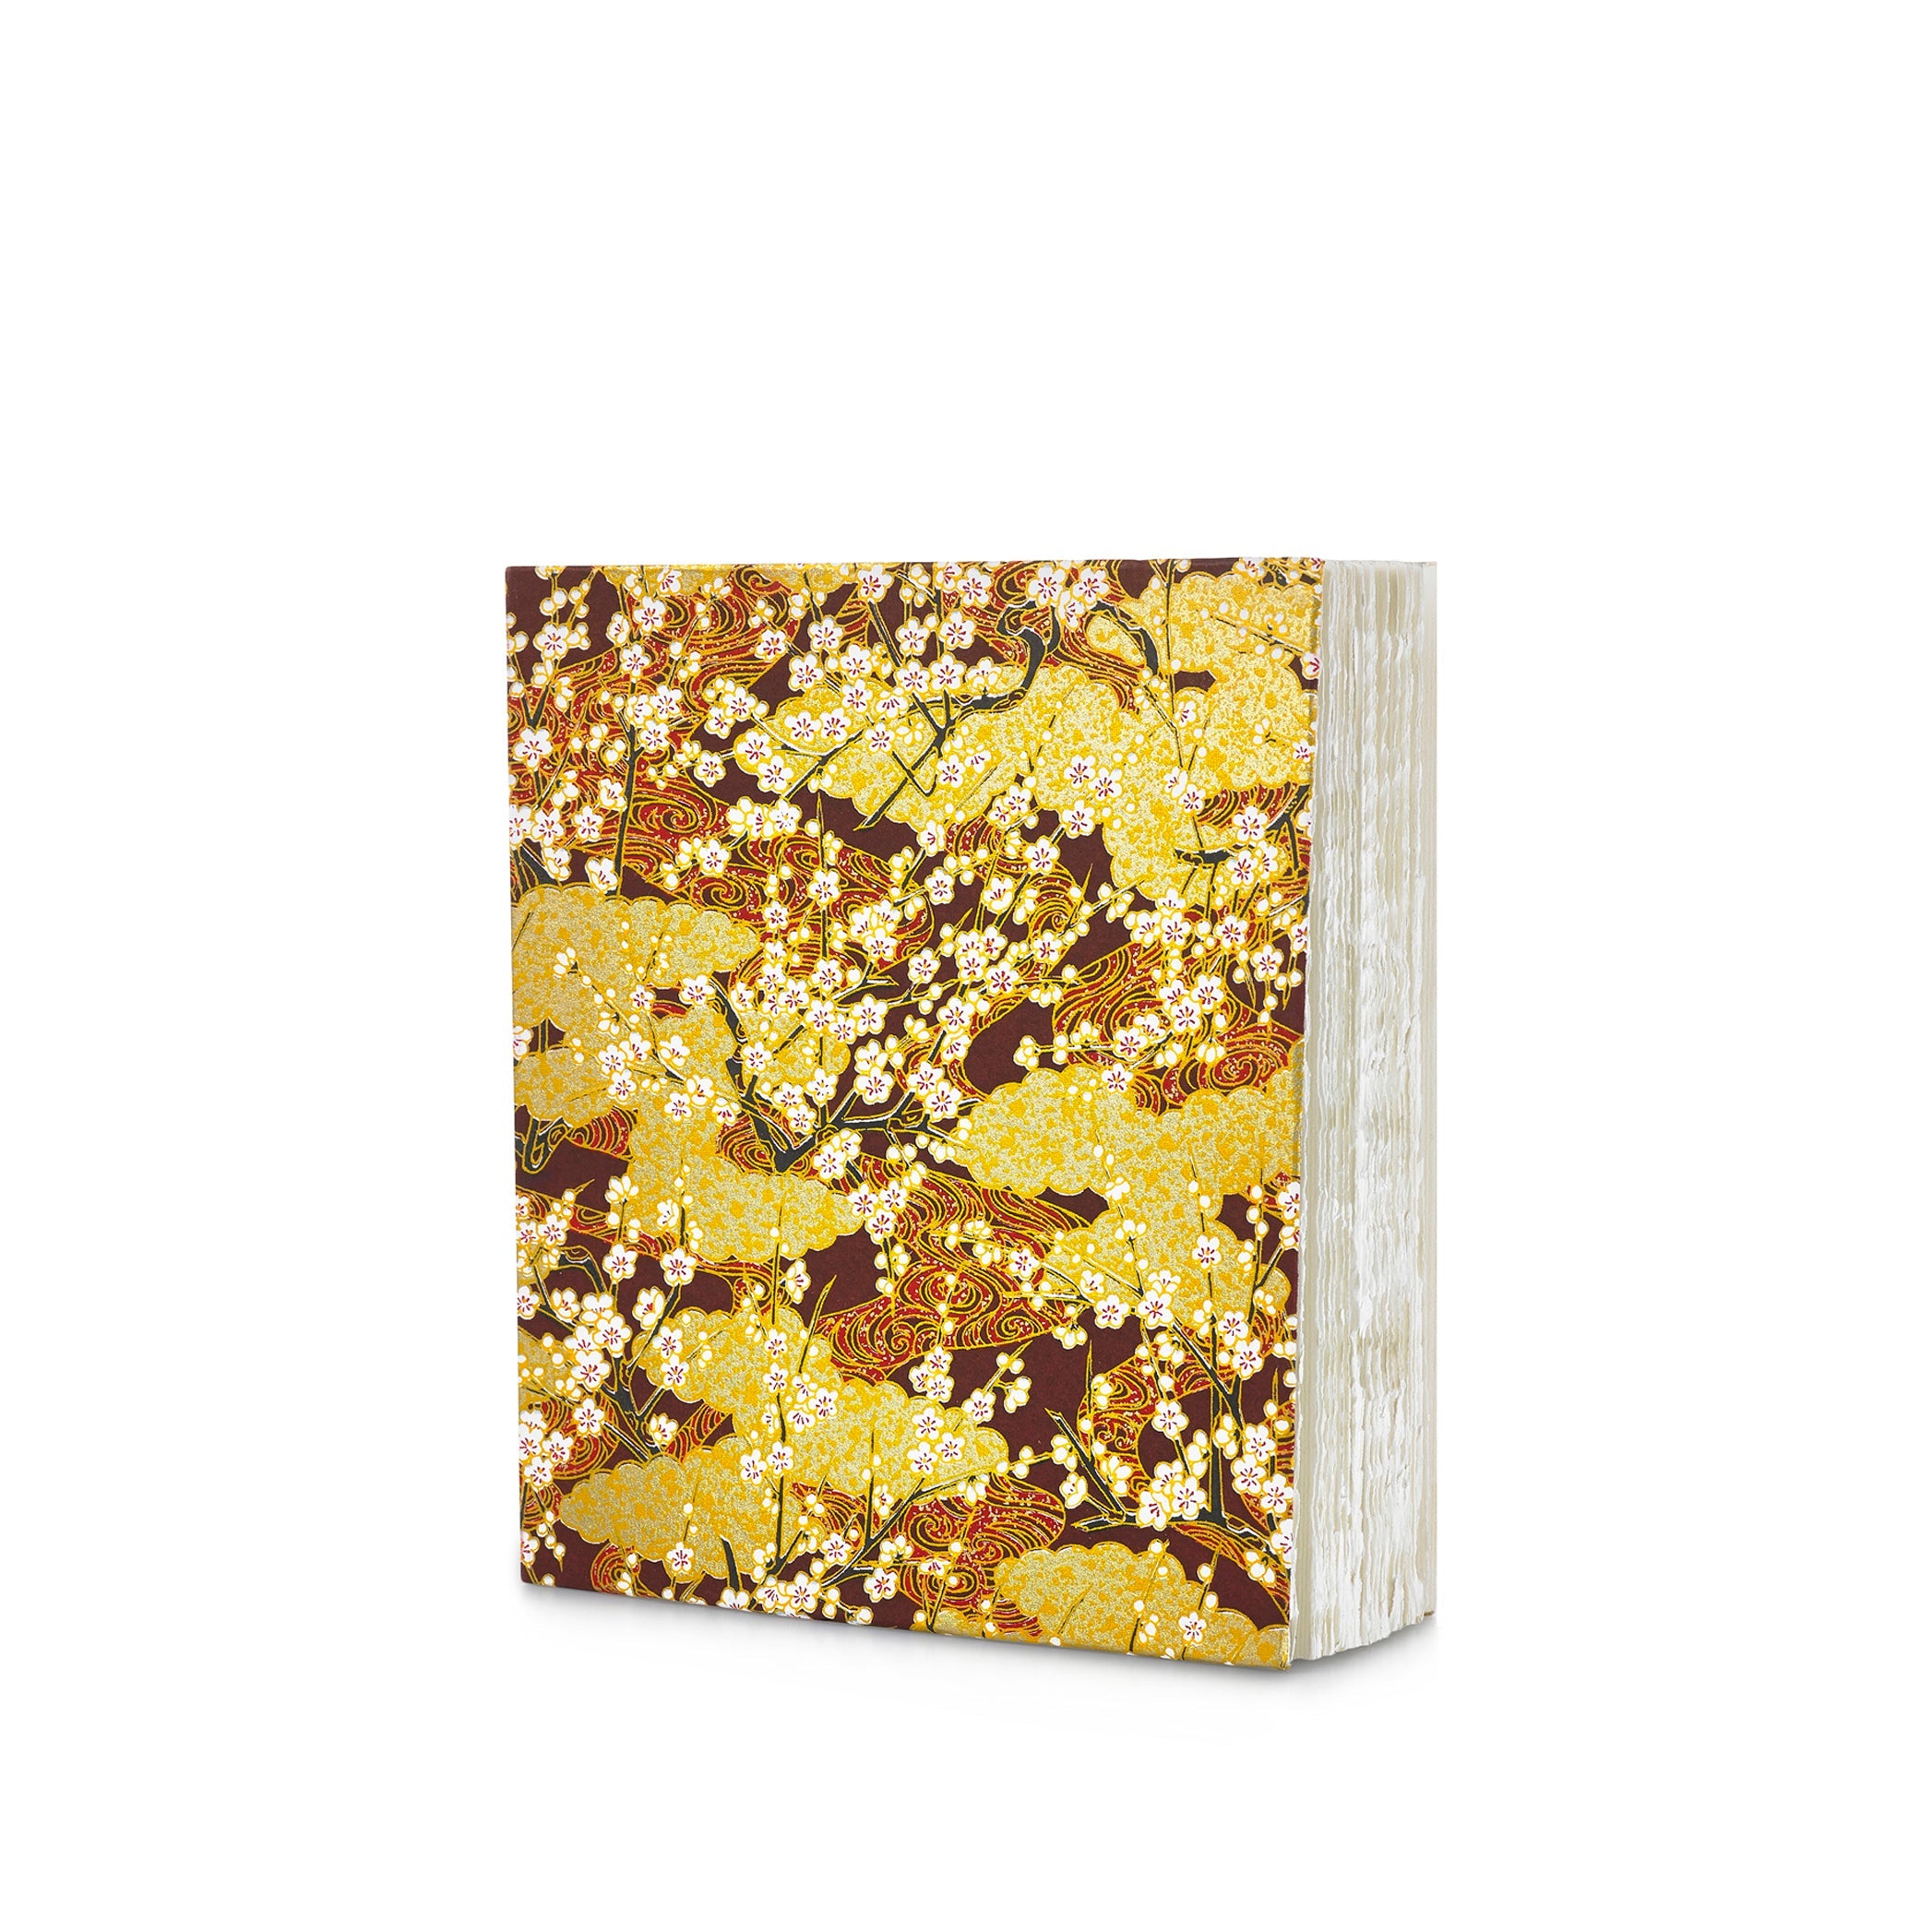 Handprinted Japanese Chiyogami Covered Sketchbook, Golden Clouds and Flowers, 20cm x 17cm